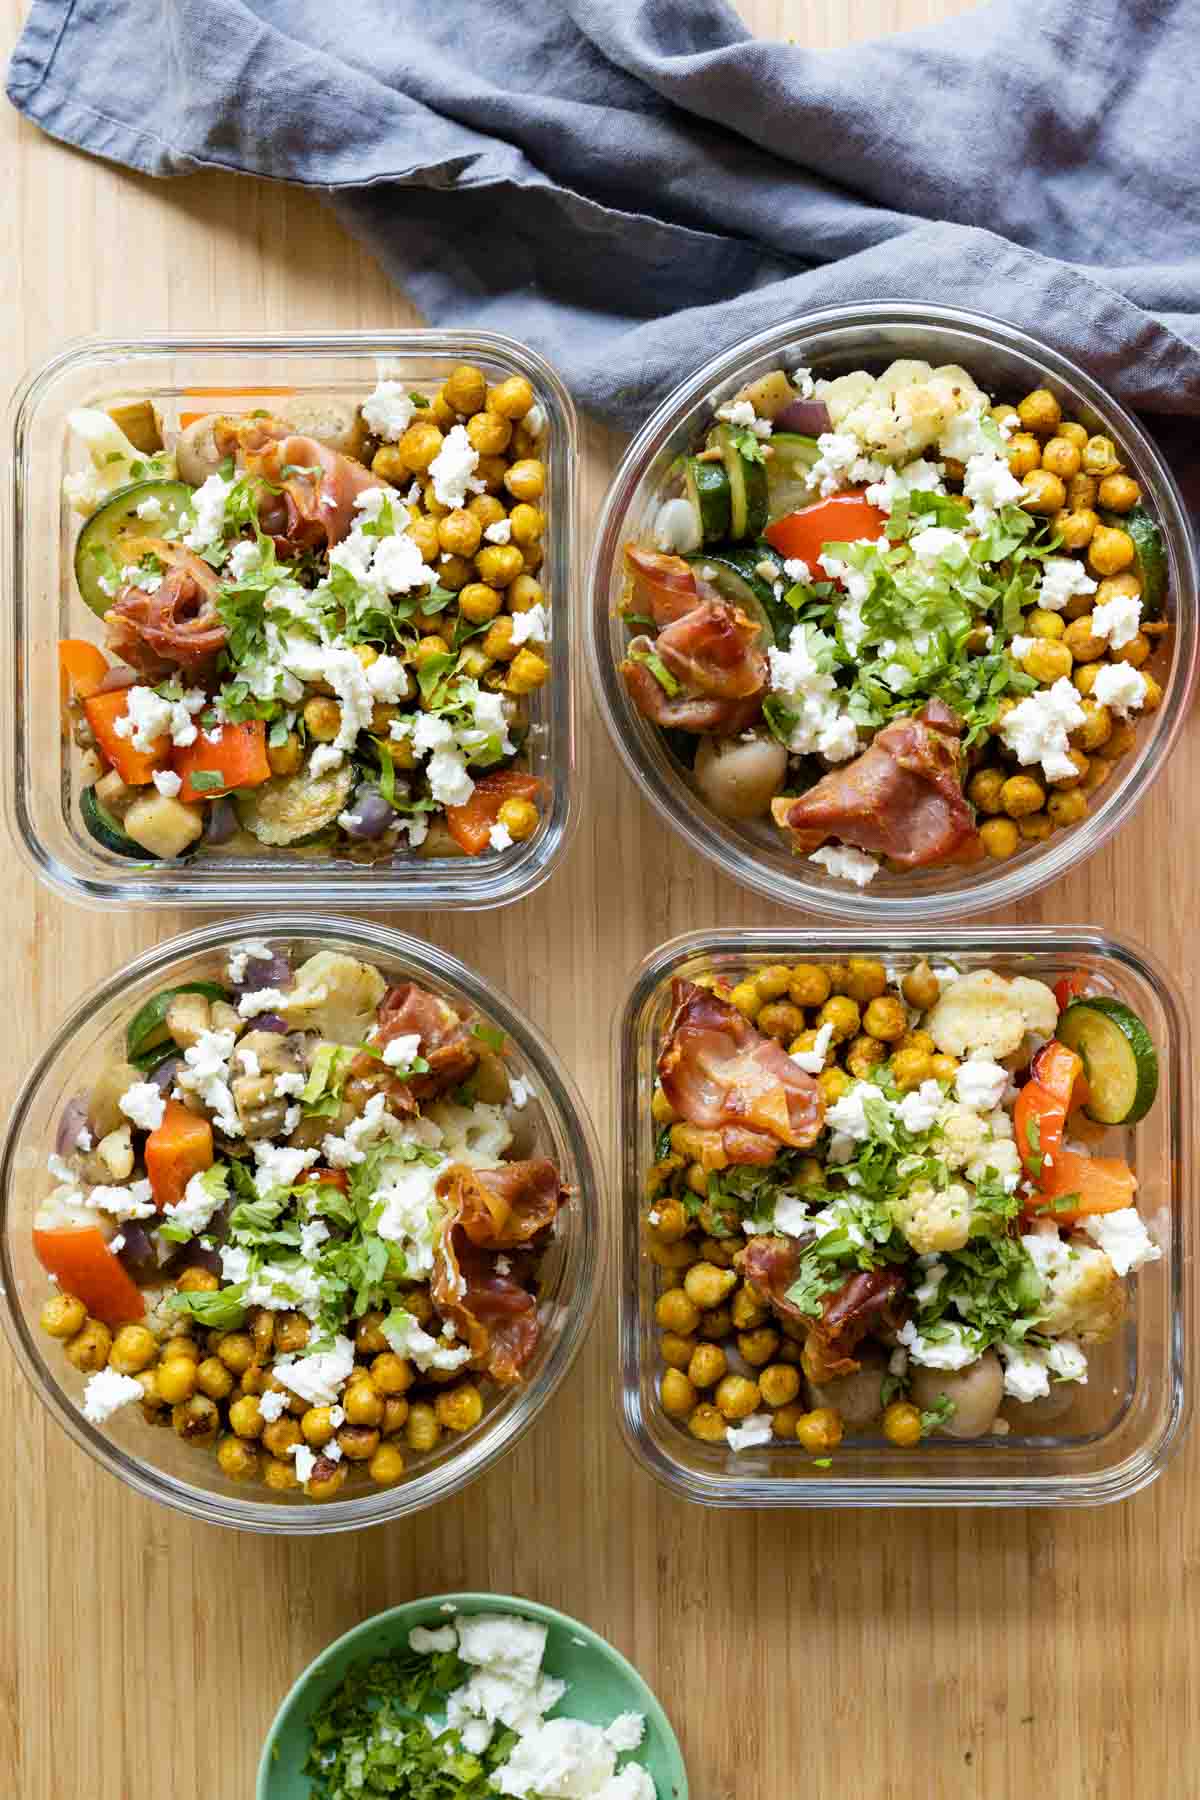 Four meal prep containers filled with chickpeas and vegetables.